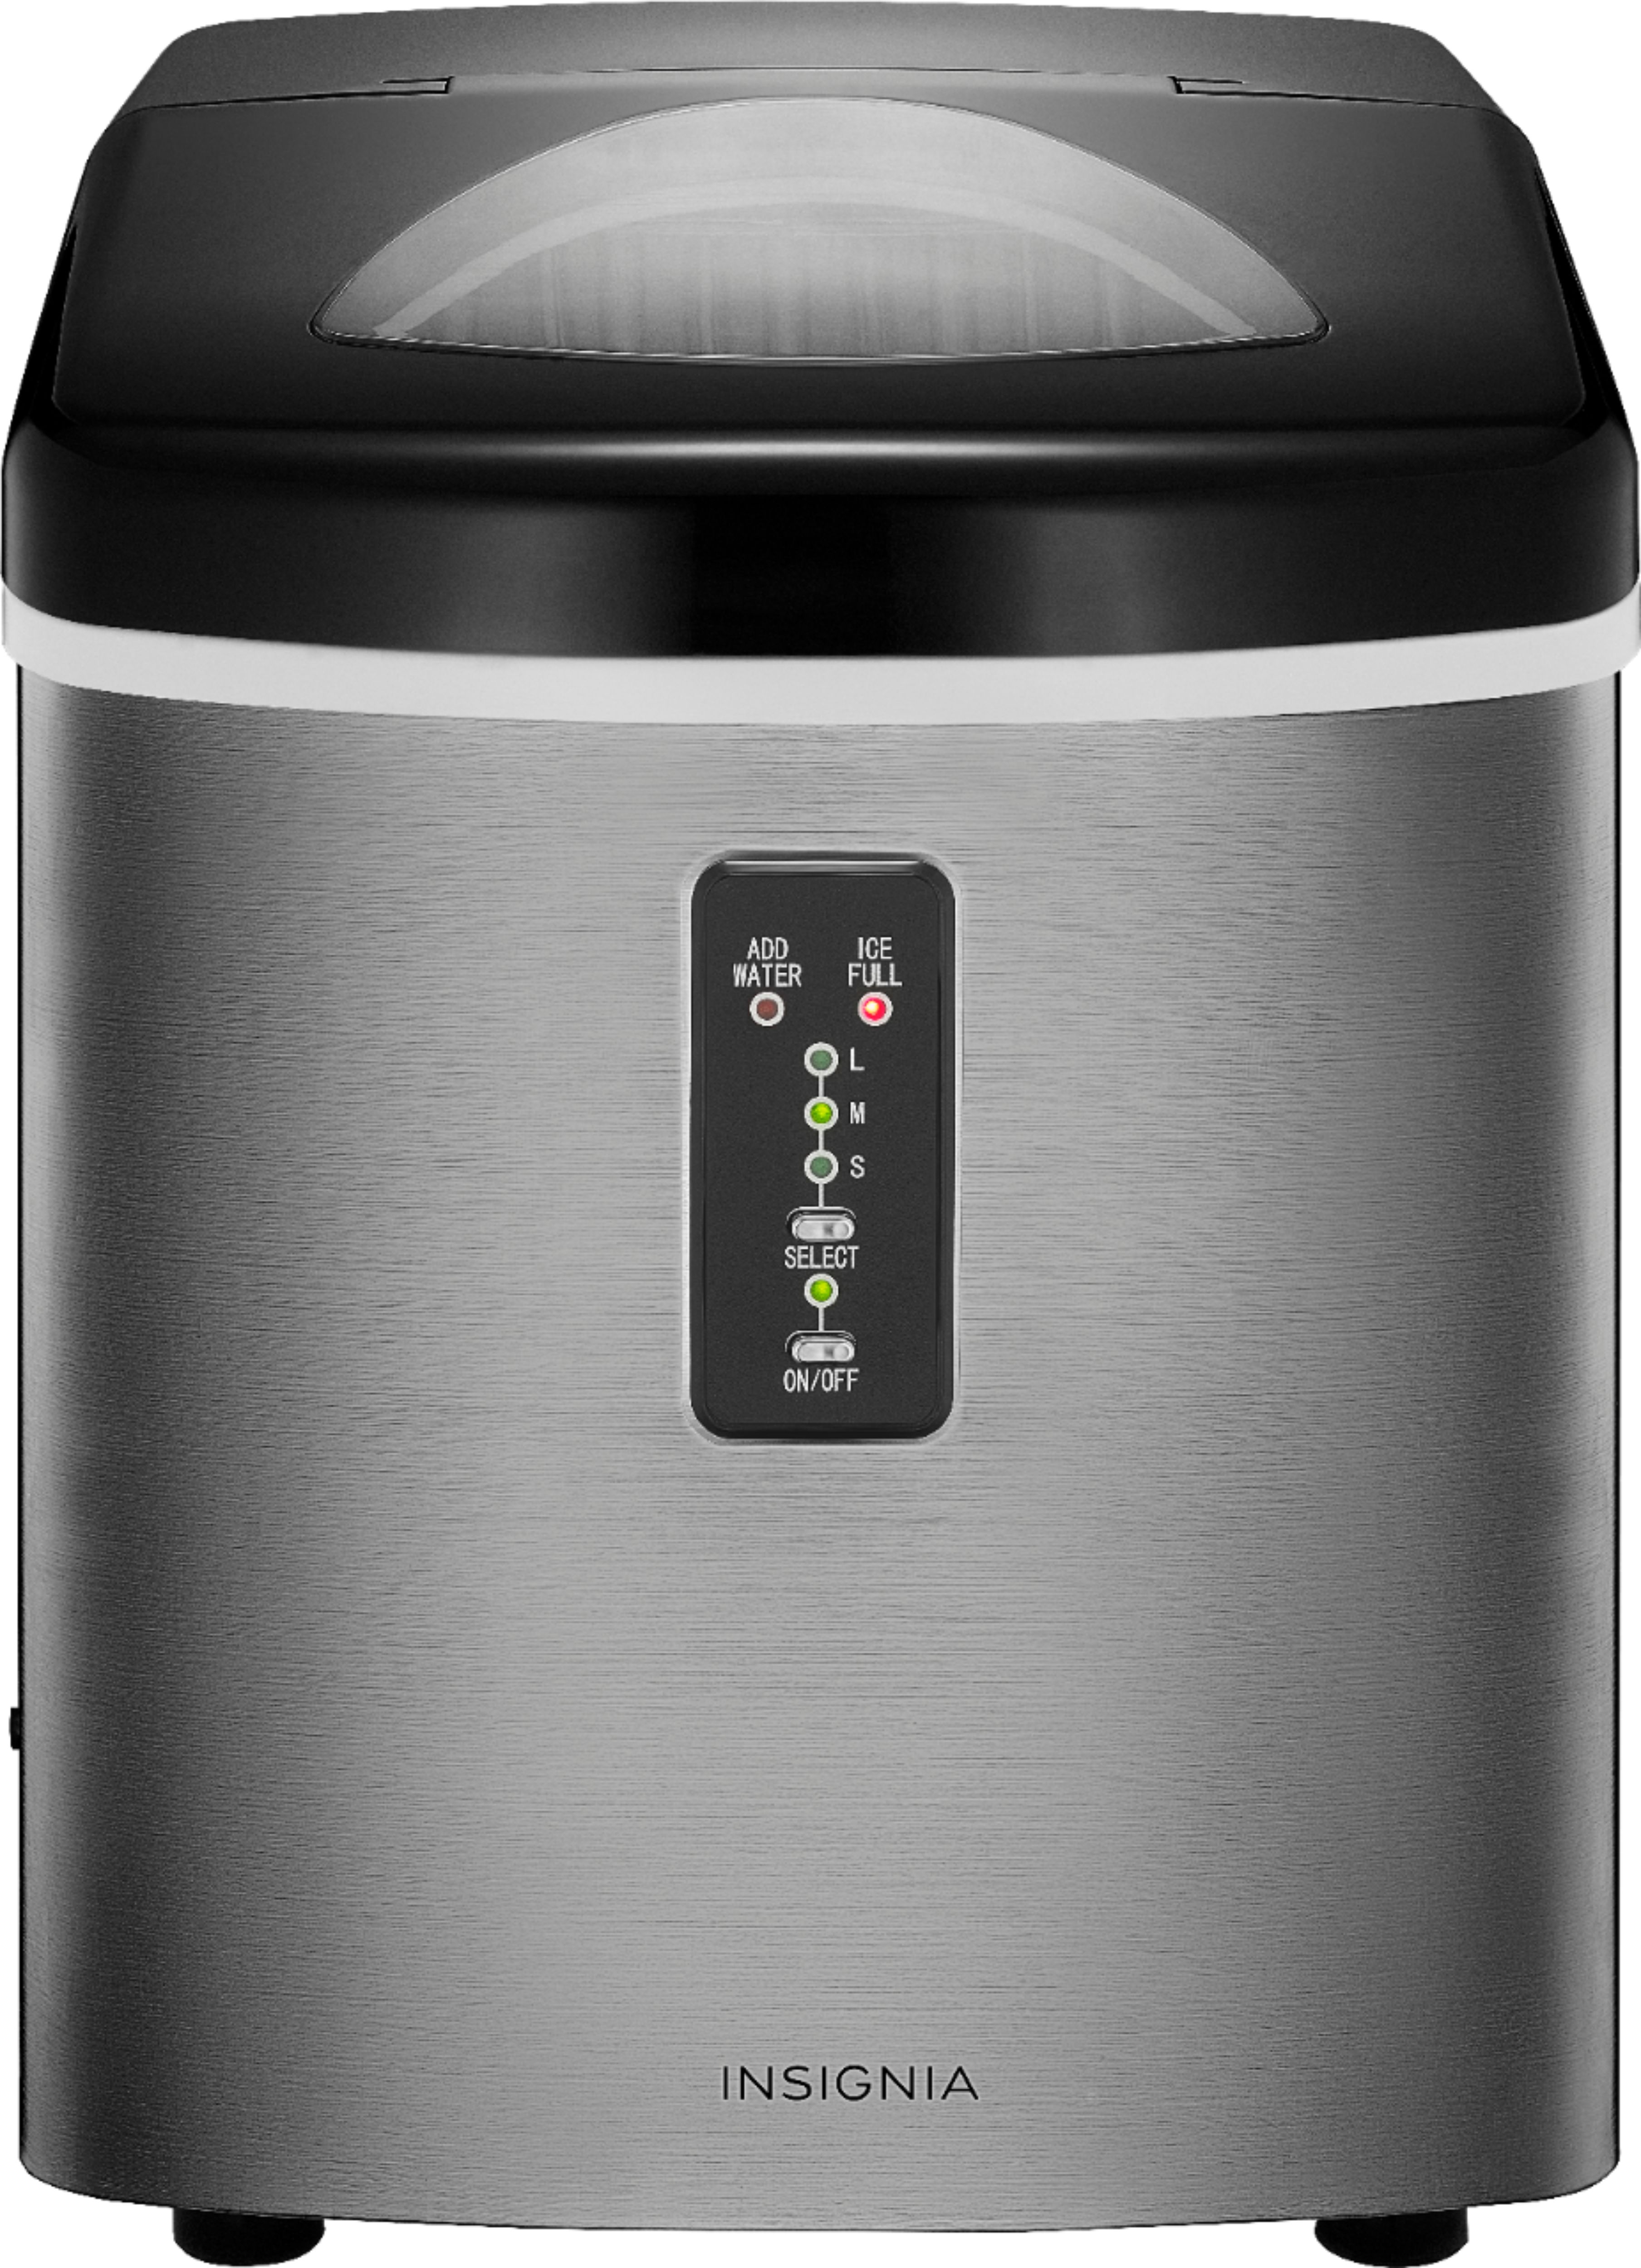 Best Buy: Igloo 33-Pound Automatic Portable Countertop Ice Maker Machine  ICEB33SL